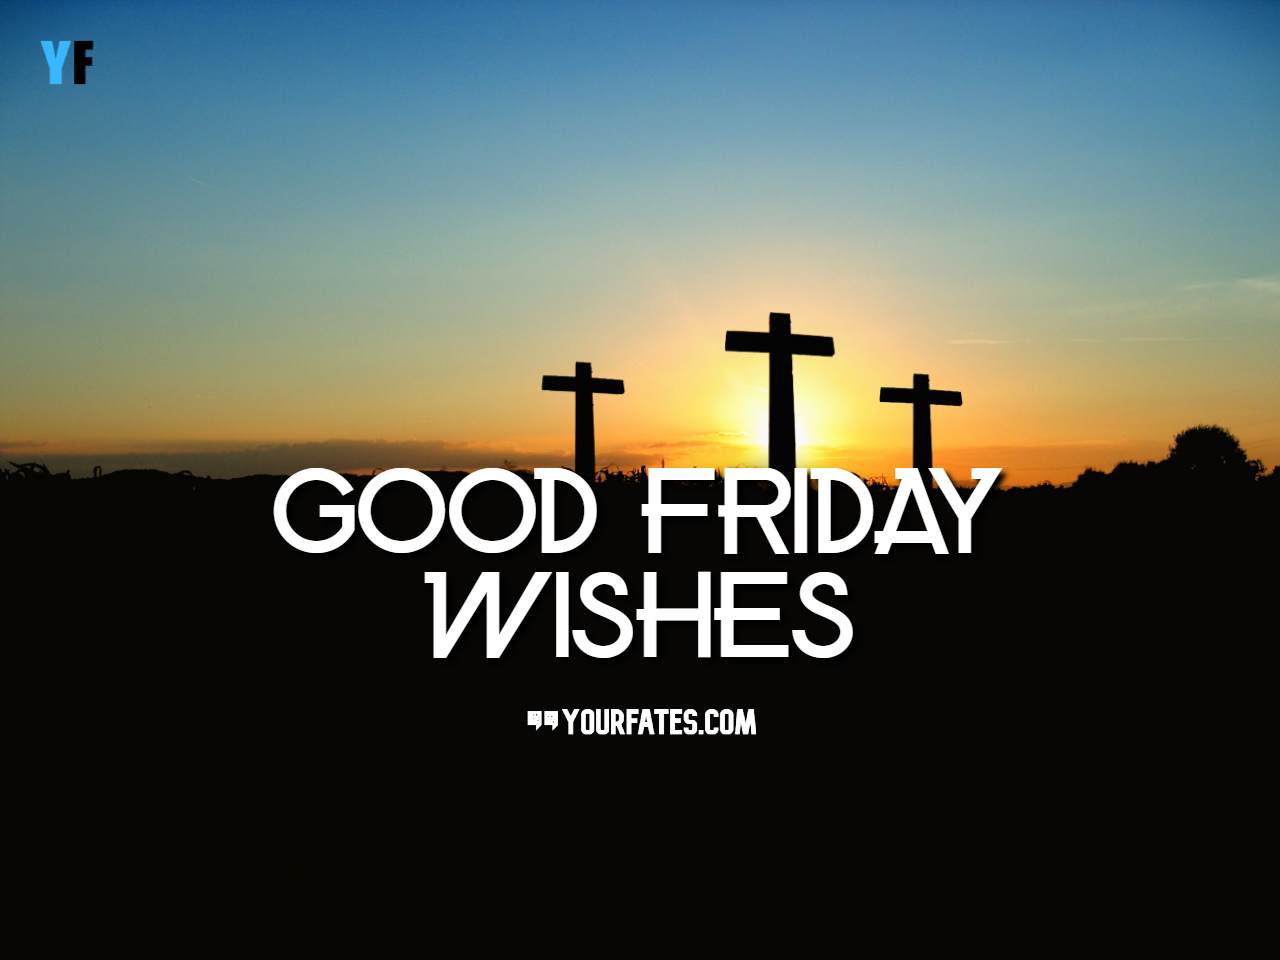 Happy Good Friday Wishes 2021: Easter Friday Wishes Image